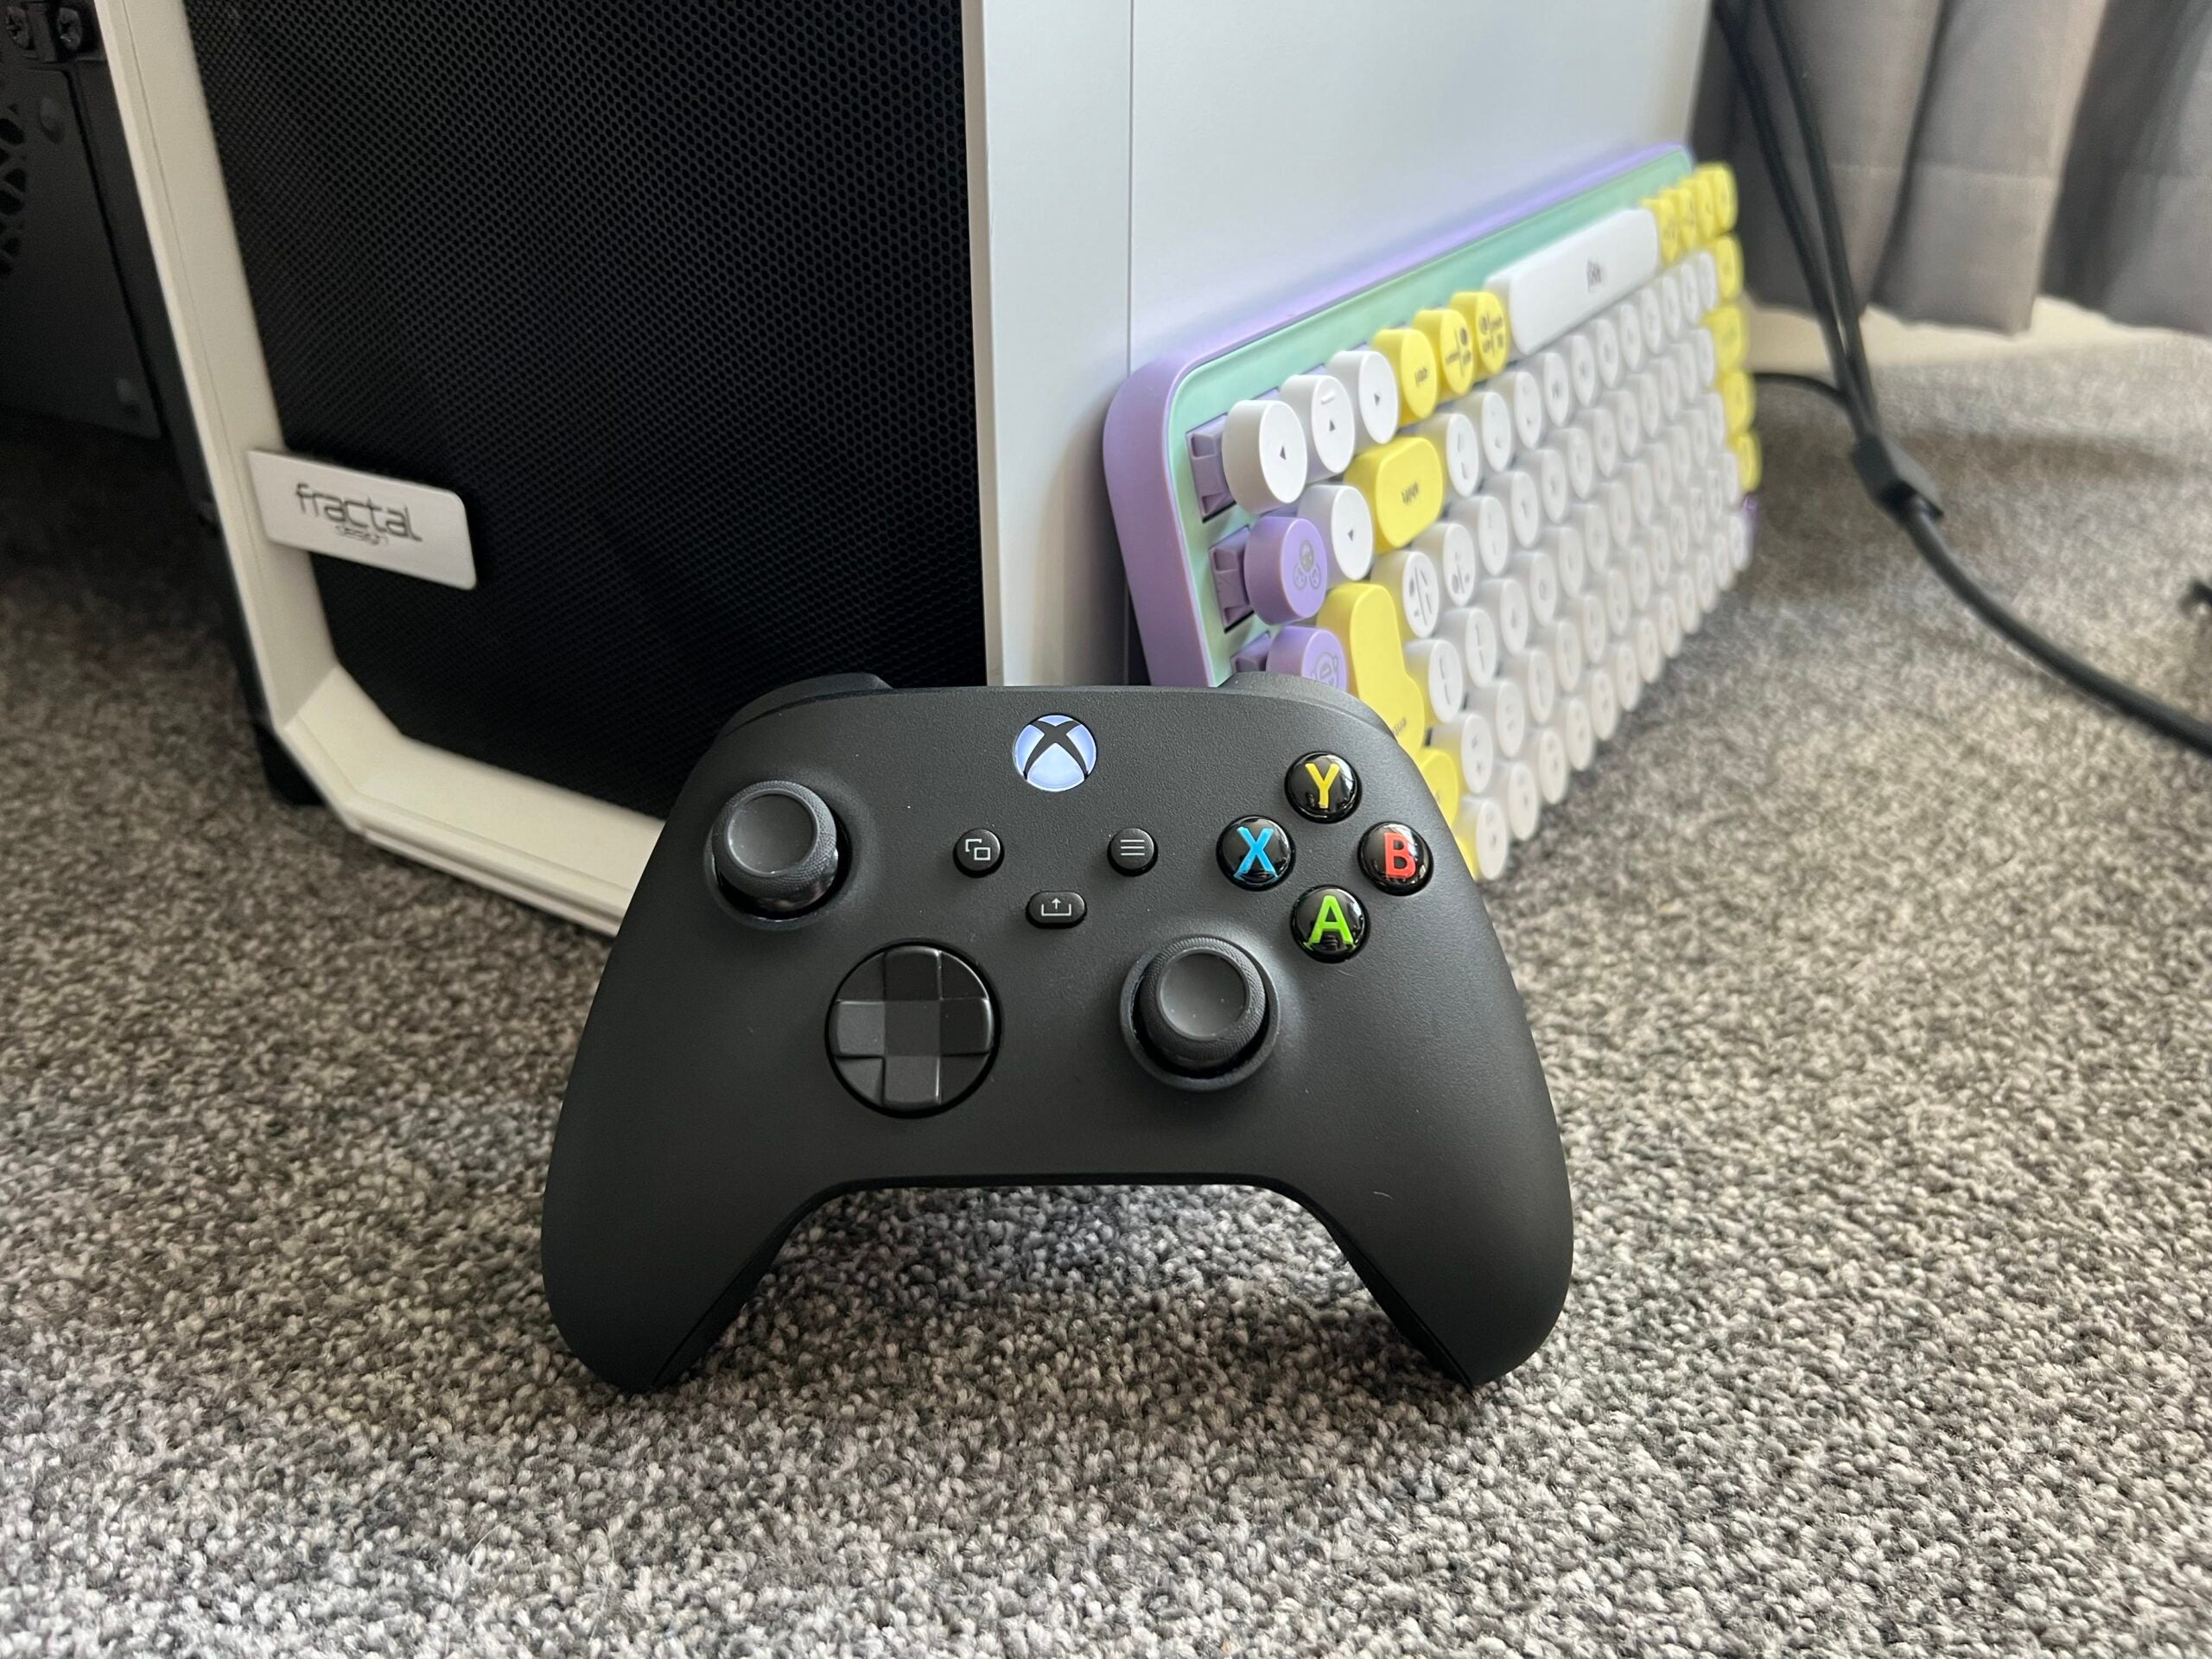 Xbox controller connected to PC